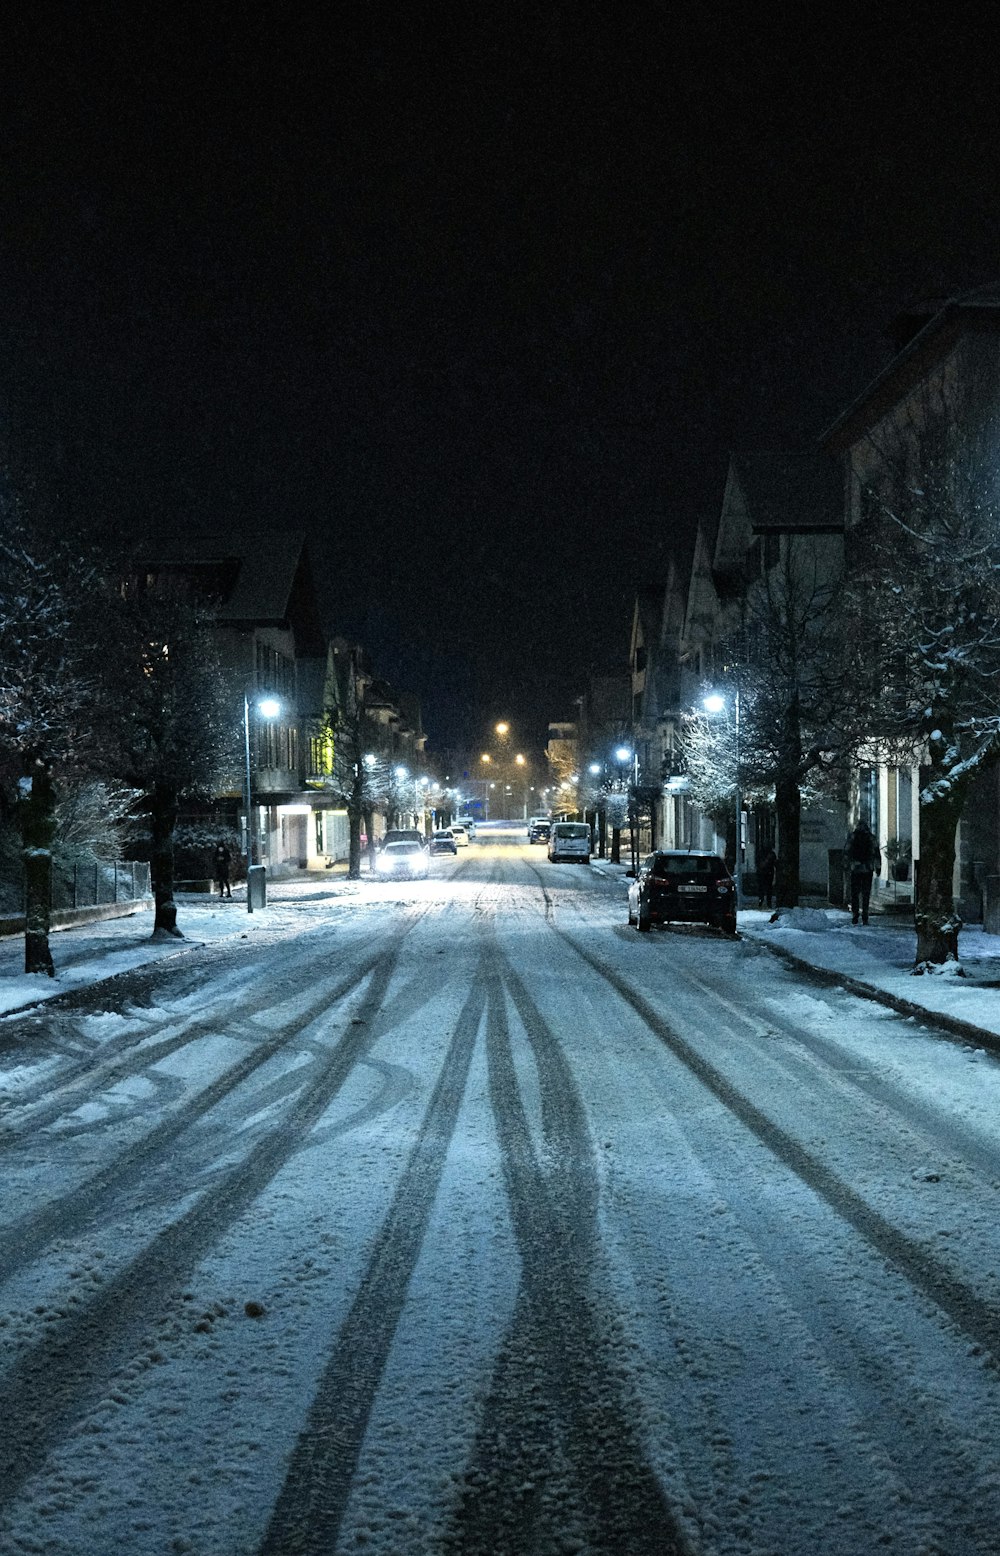 a snow covered street at night with cars parked on the side of the road